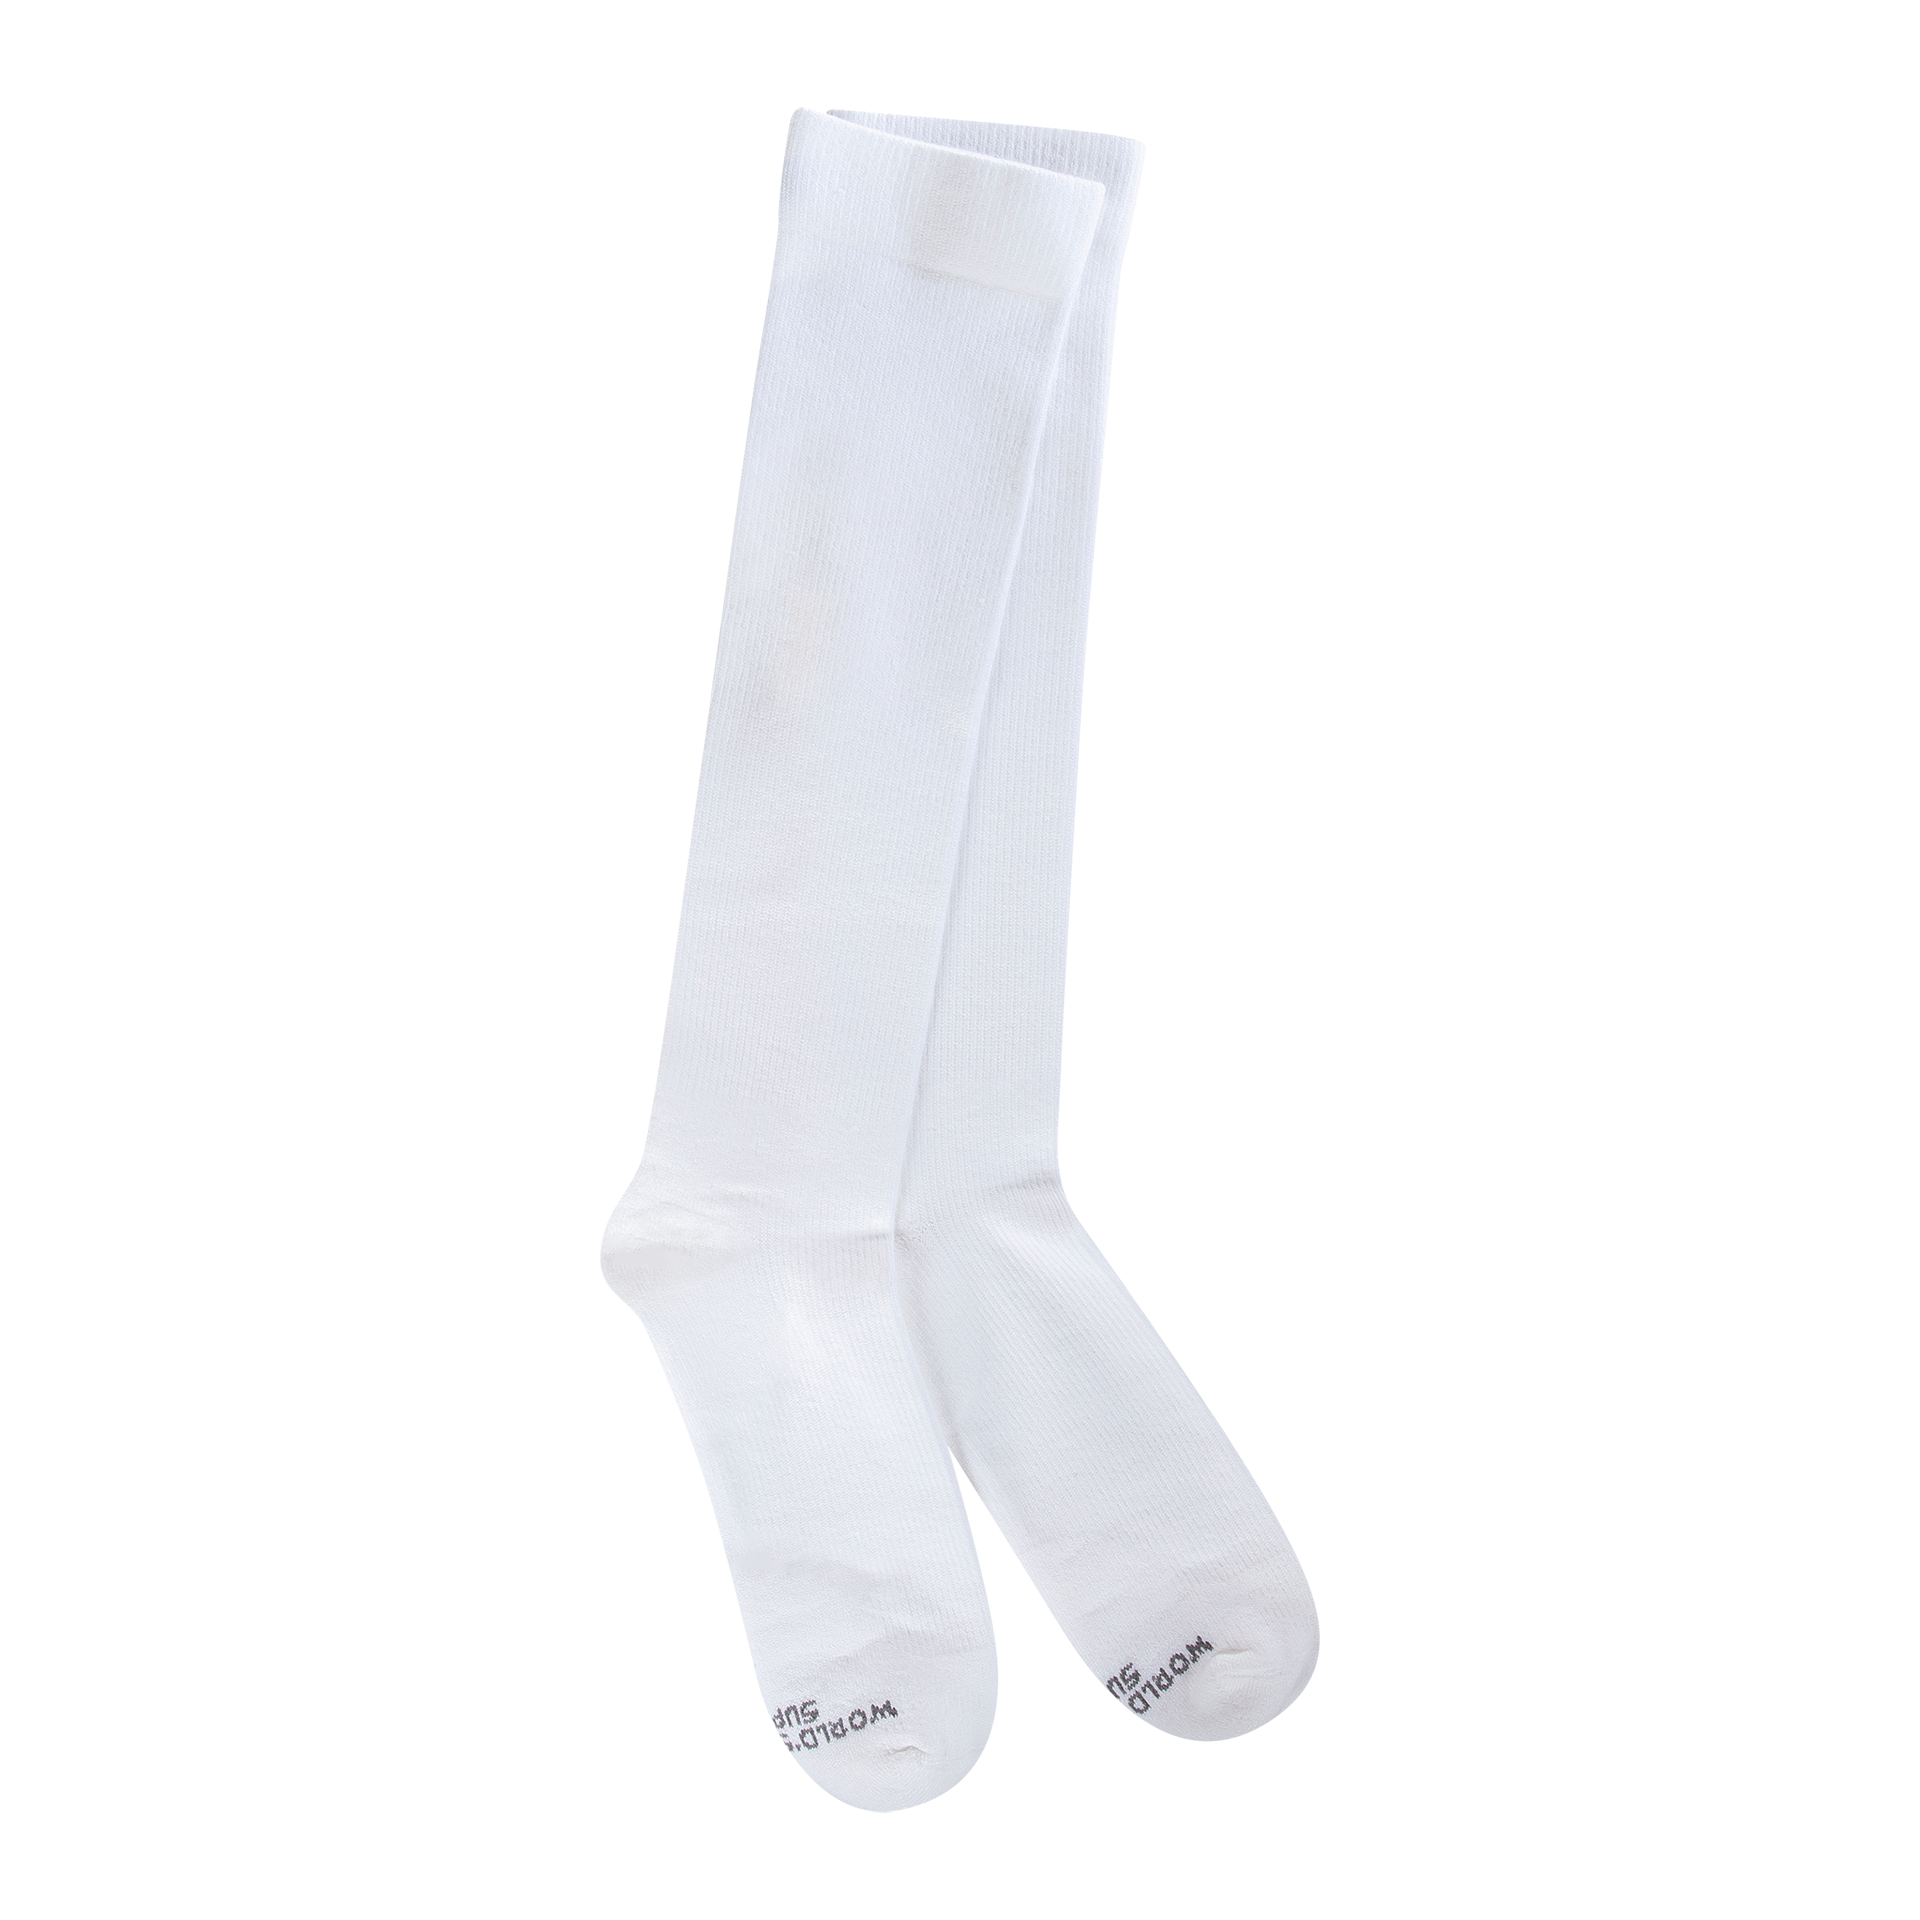 Support Fit Over-the-calf White